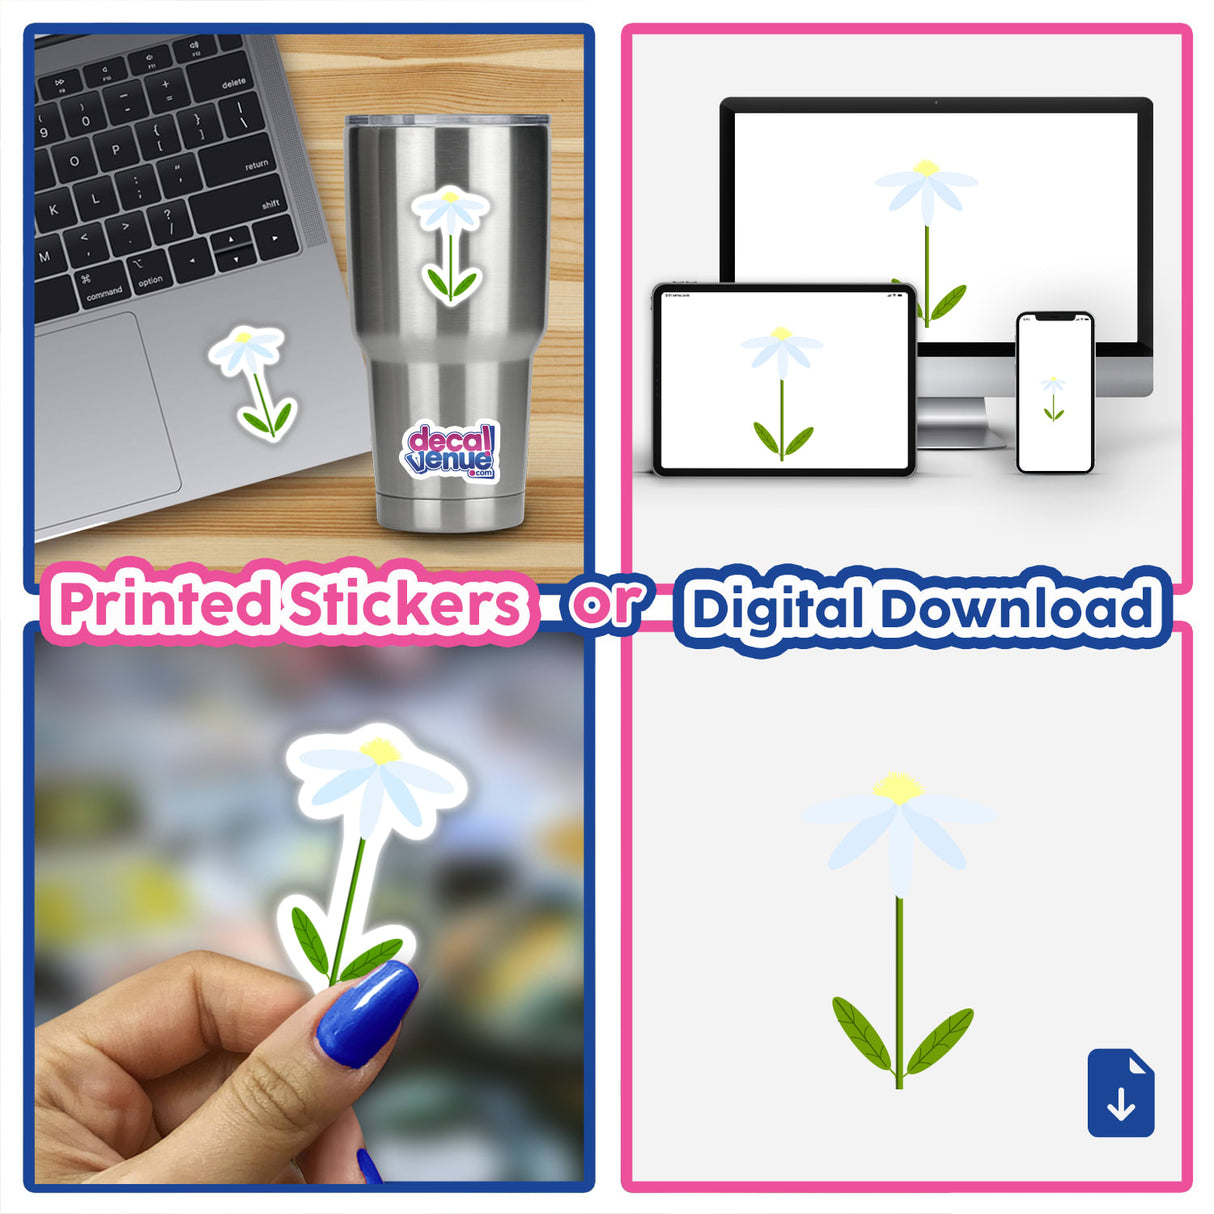 Collage of Light Blue Flower stickers and digital artwork featuring a laptop with stickers, a close-up of a hand with nail art, and white flowers.